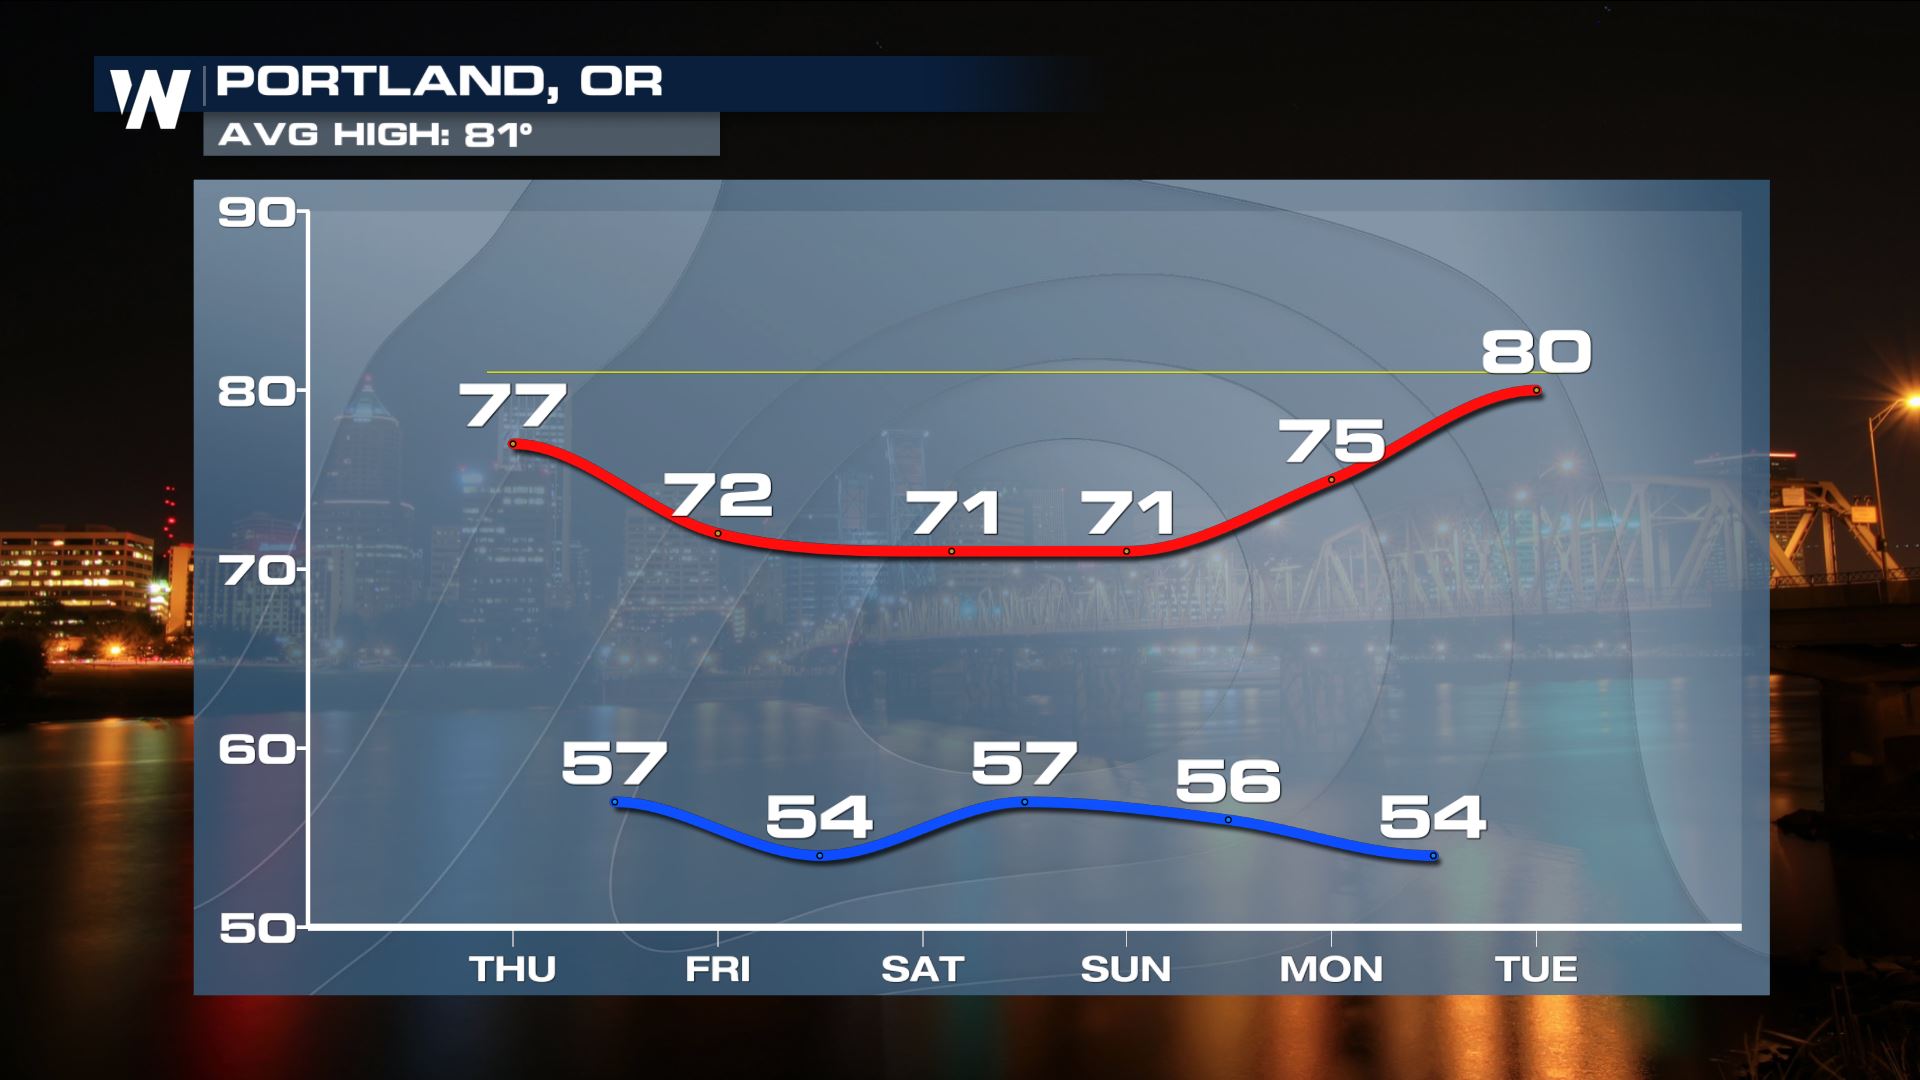 Hot Summer: Most 90° Days Observed in Portland